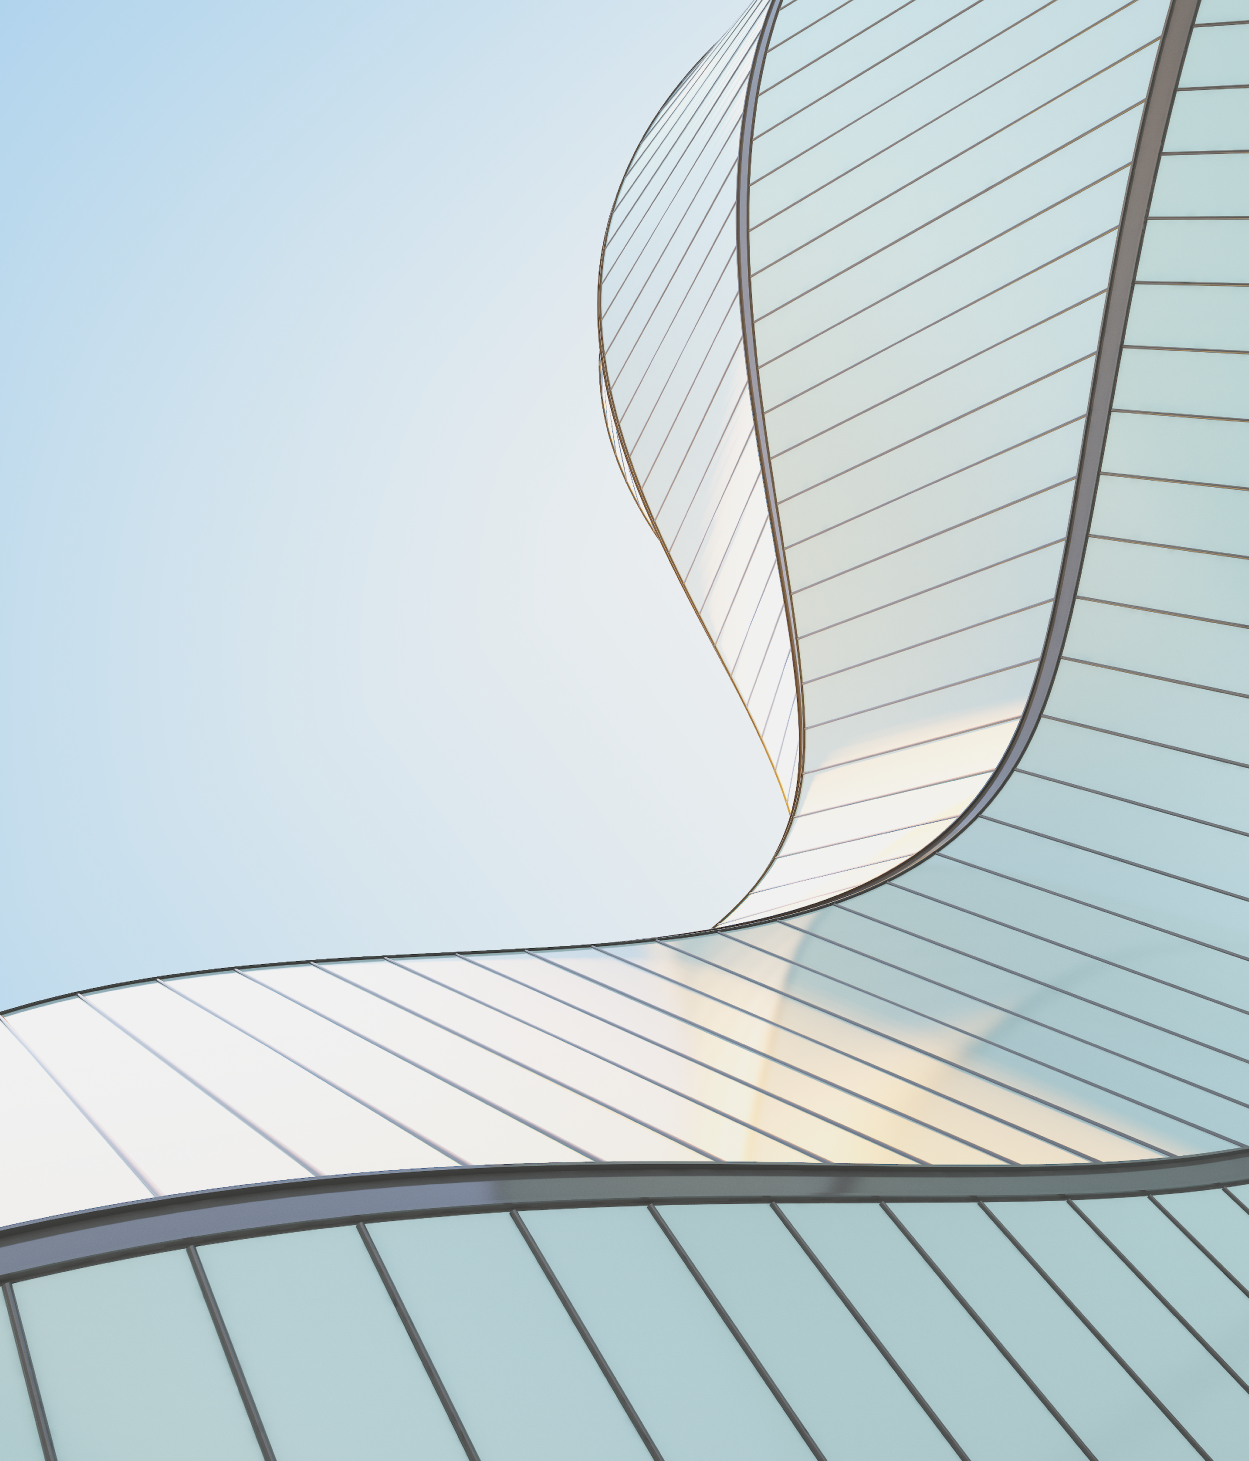 Abstract curved office building facade